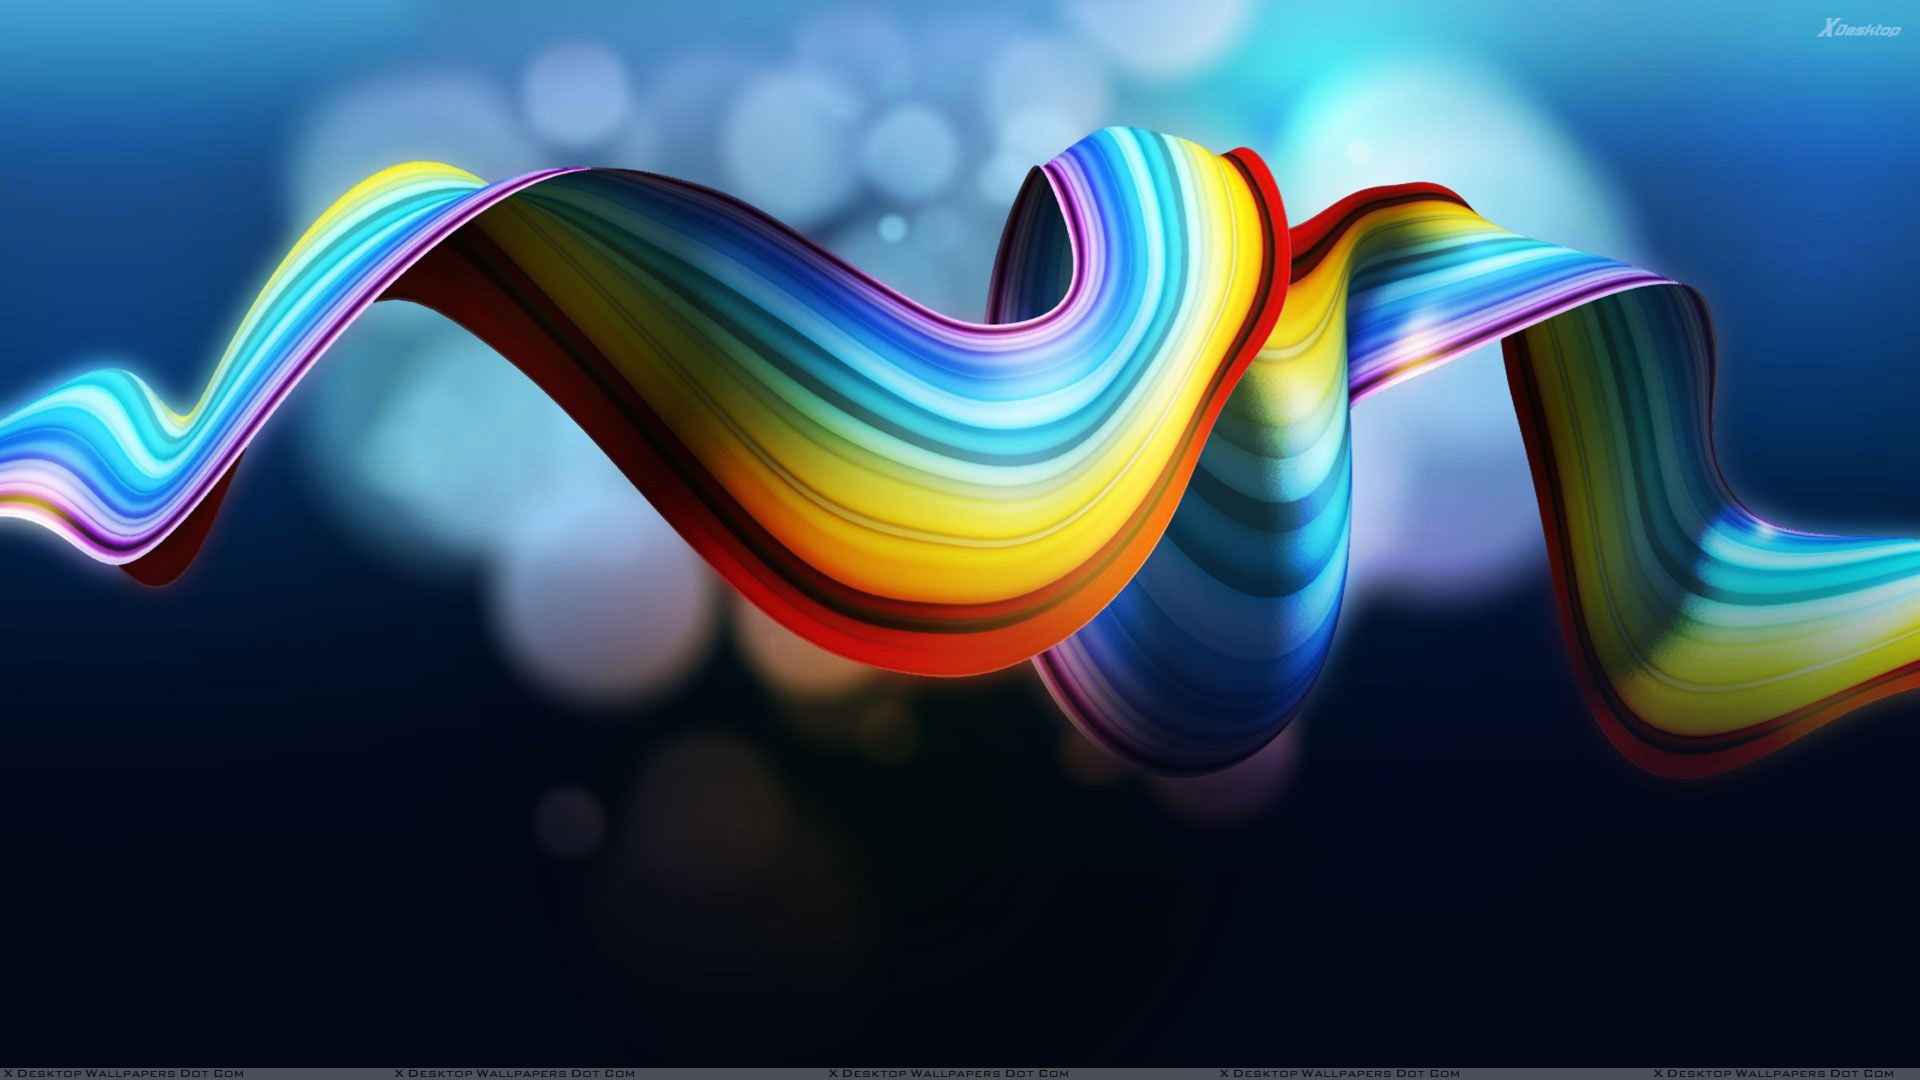 HD Wallpaper Rainbow Abstract Background